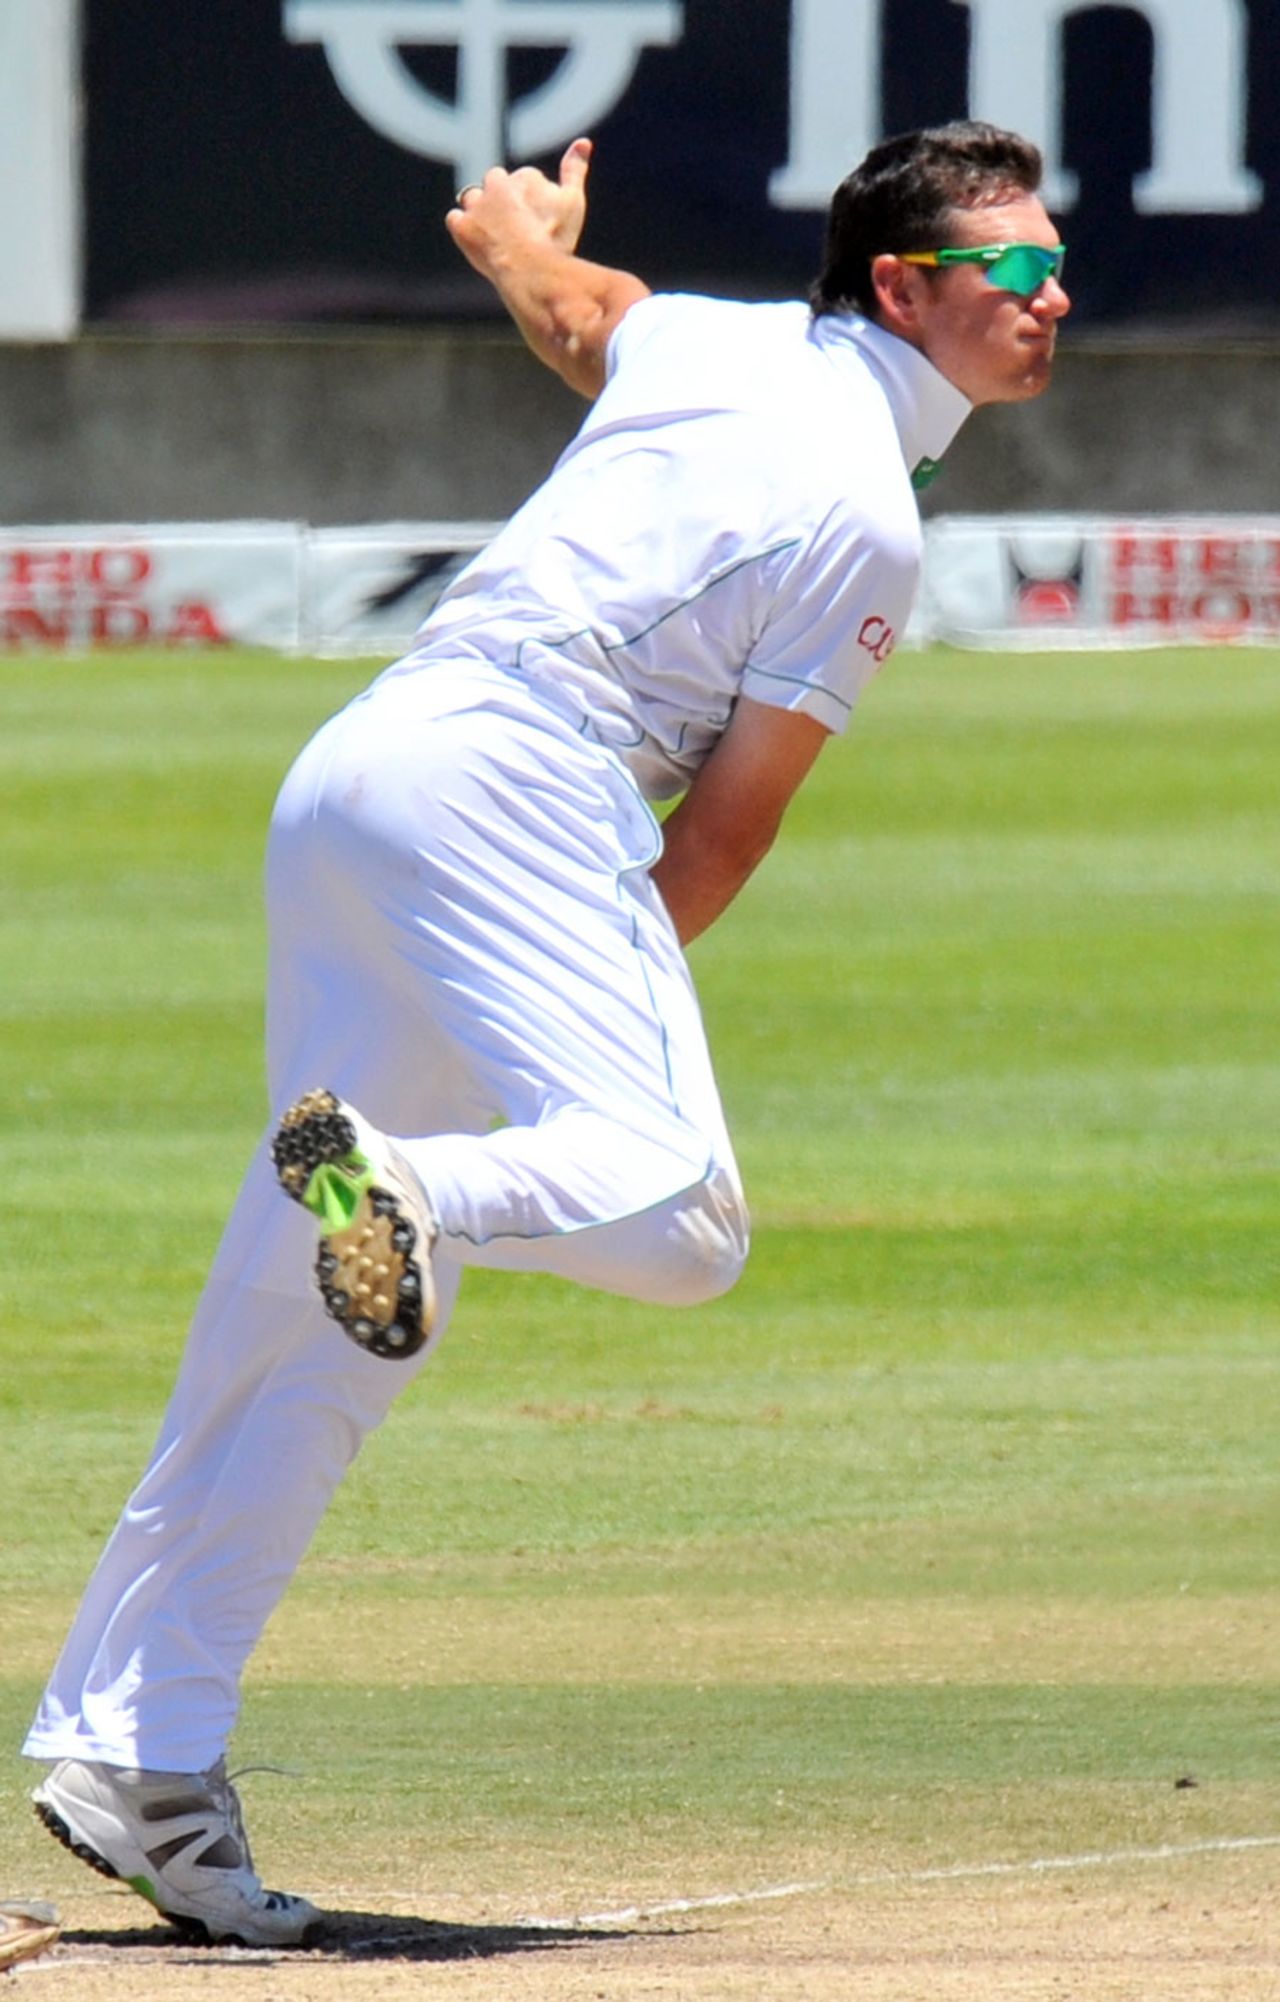 Graeme Smith bowling his offspin, South Africa v India, 3rd Test, Cape Town, 5th day, January 6, 2011